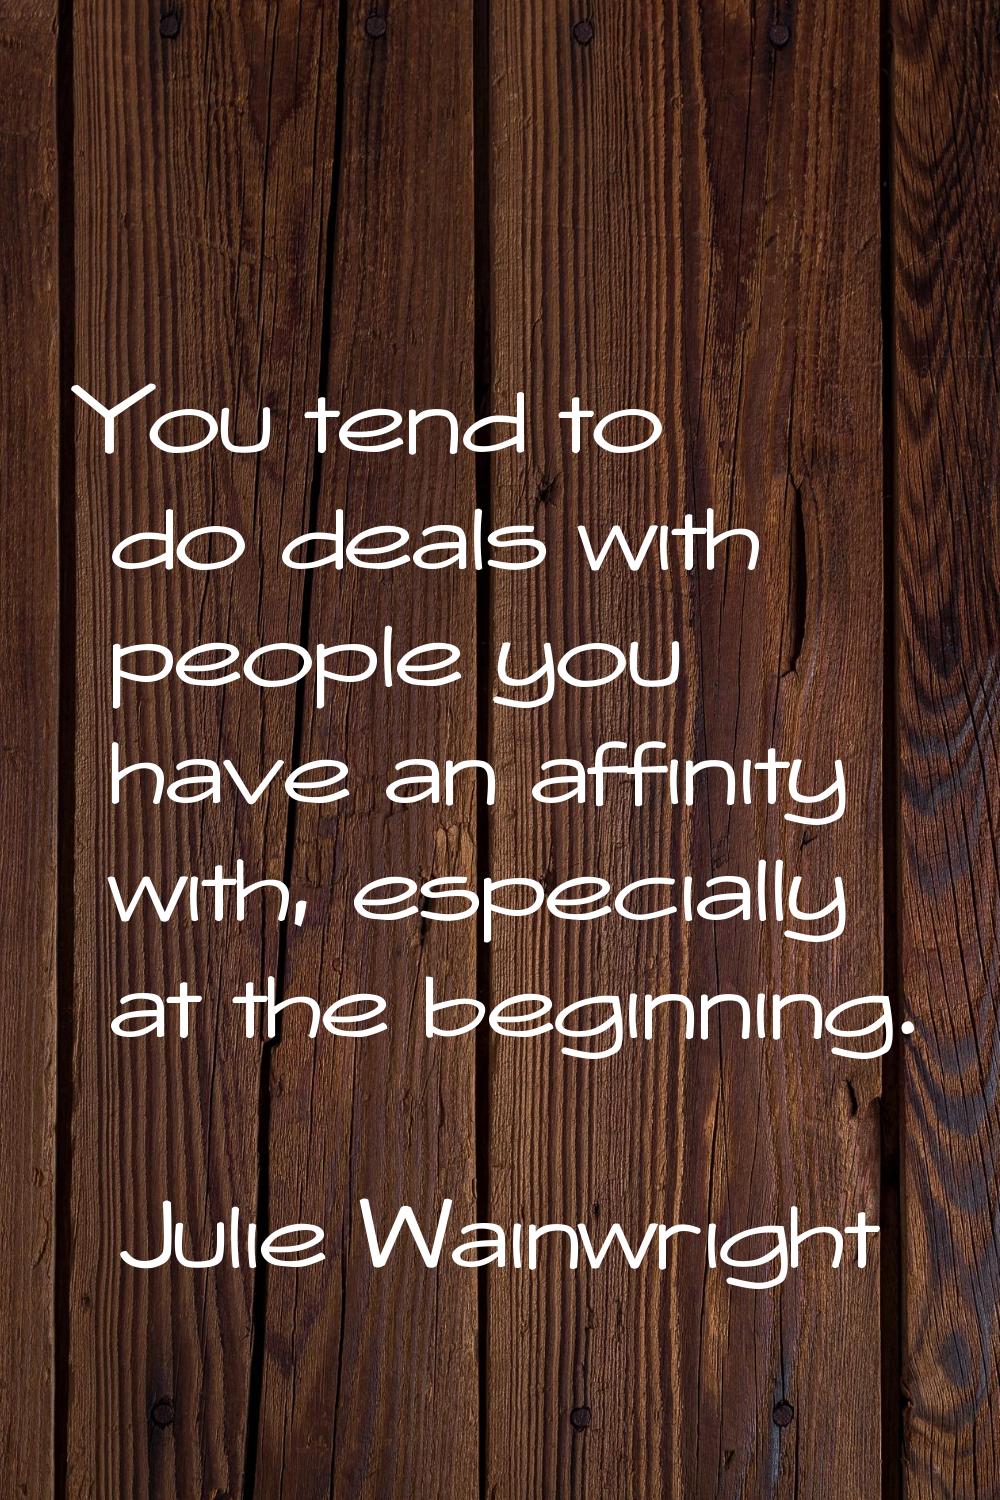 You tend to do deals with people you have an affinity with, especially at the beginning.